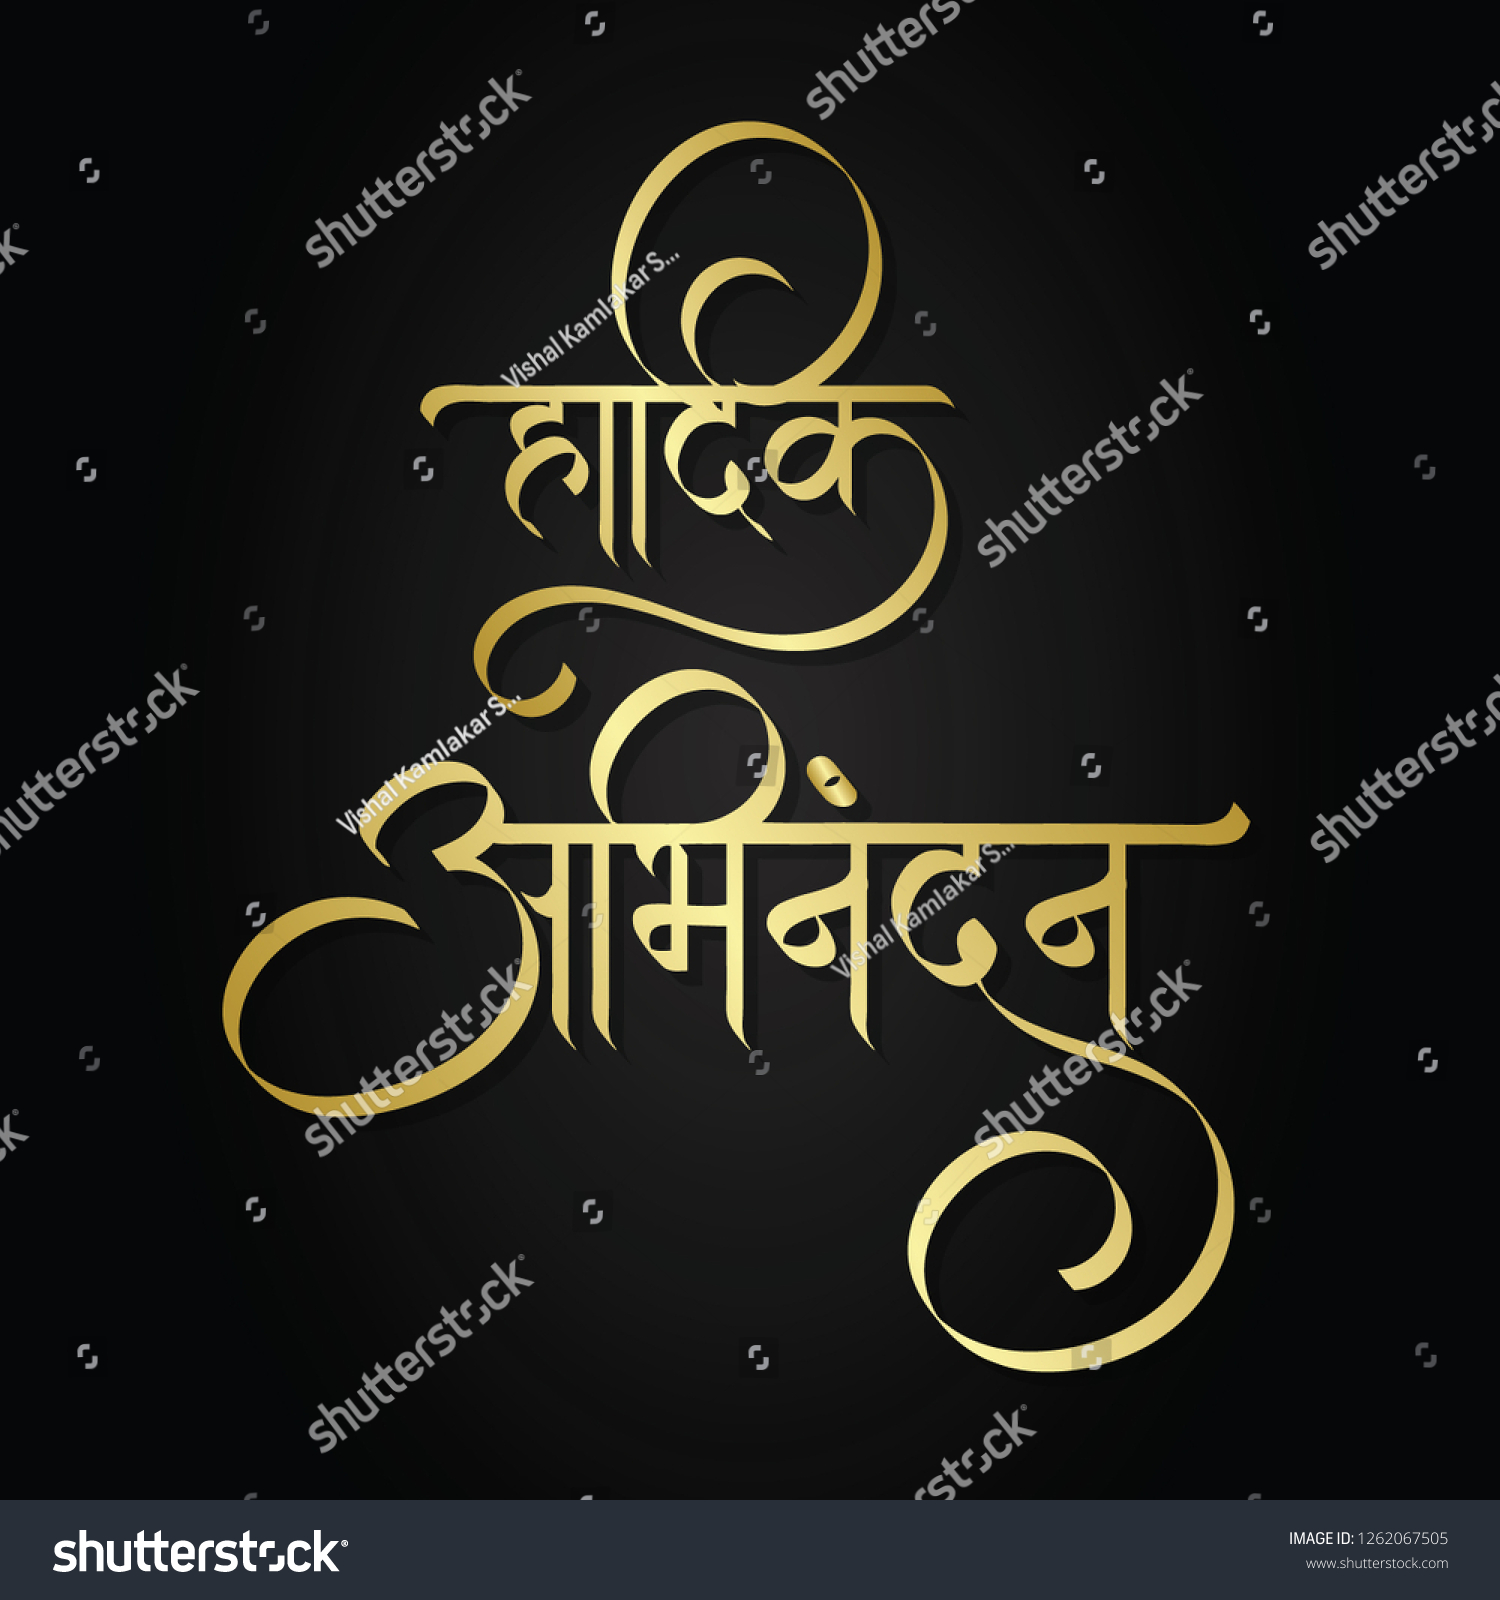 marathi calligraphy hearty congratulations congratulations wishes stock vector royalty free 1262067505 https www shutterstock com image vector marathi calligraphy hearty congratulations wishes text 1262067505